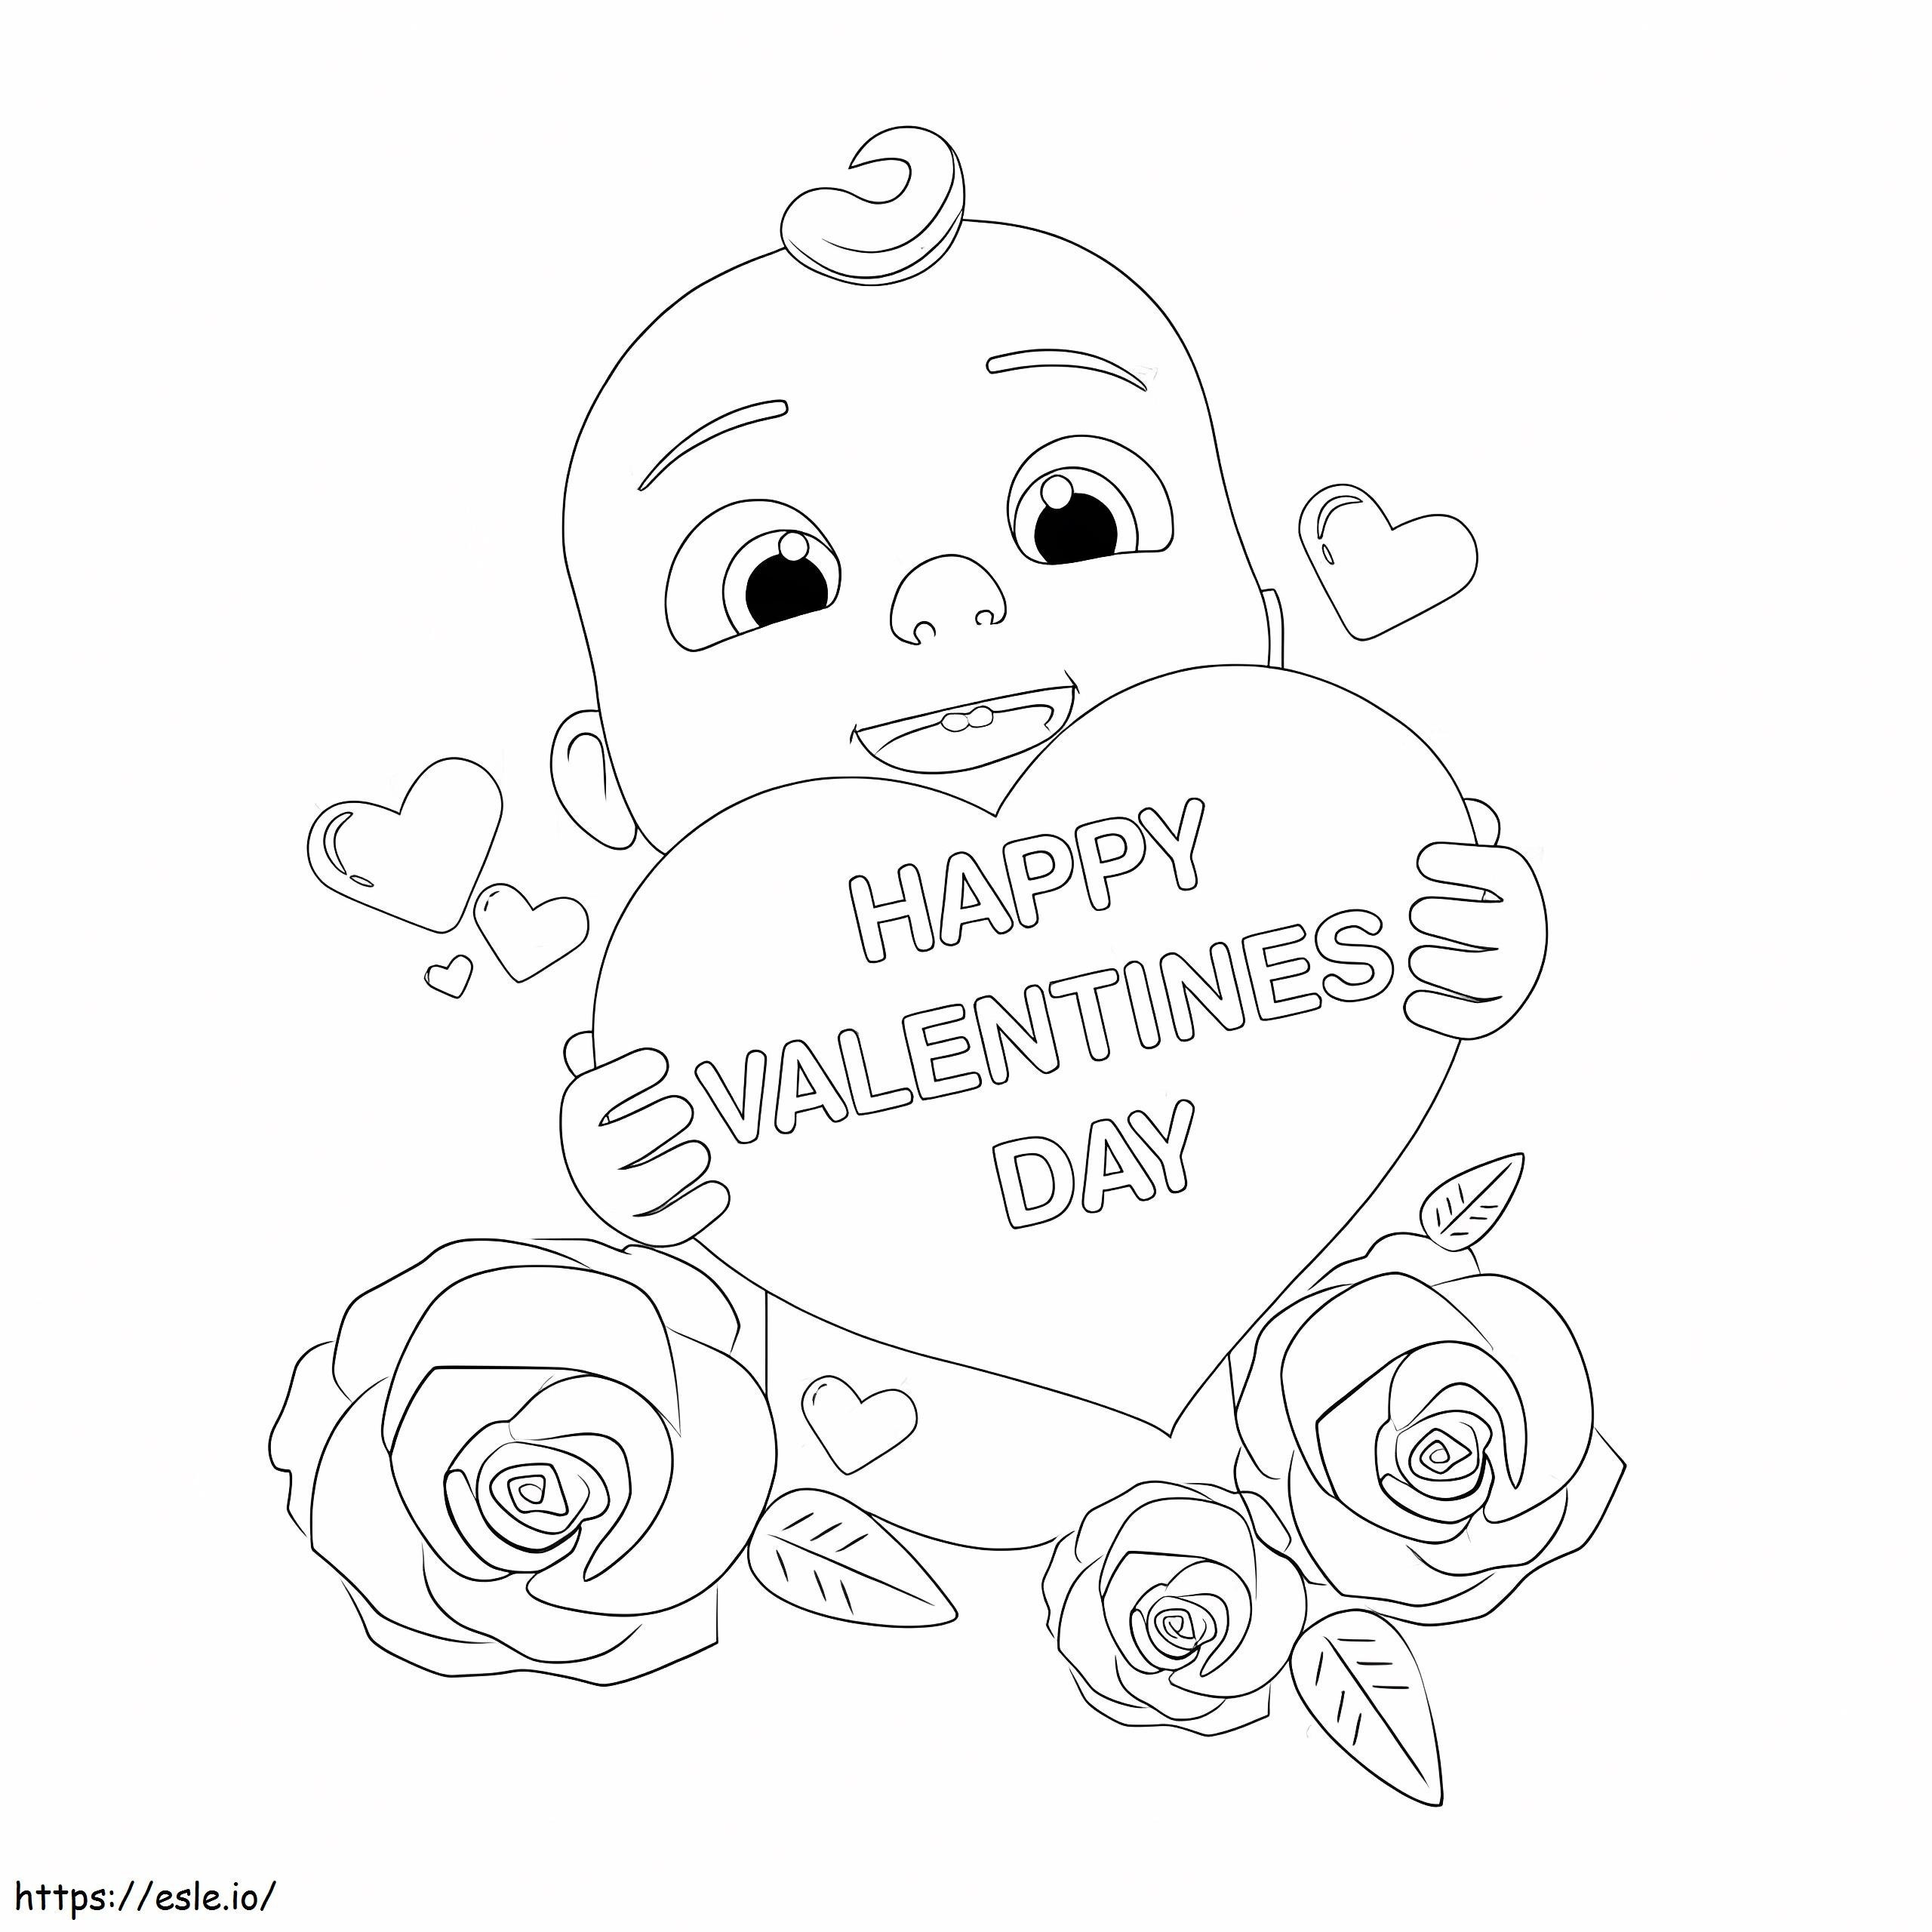 Cocomelon Velentines Day coloring page